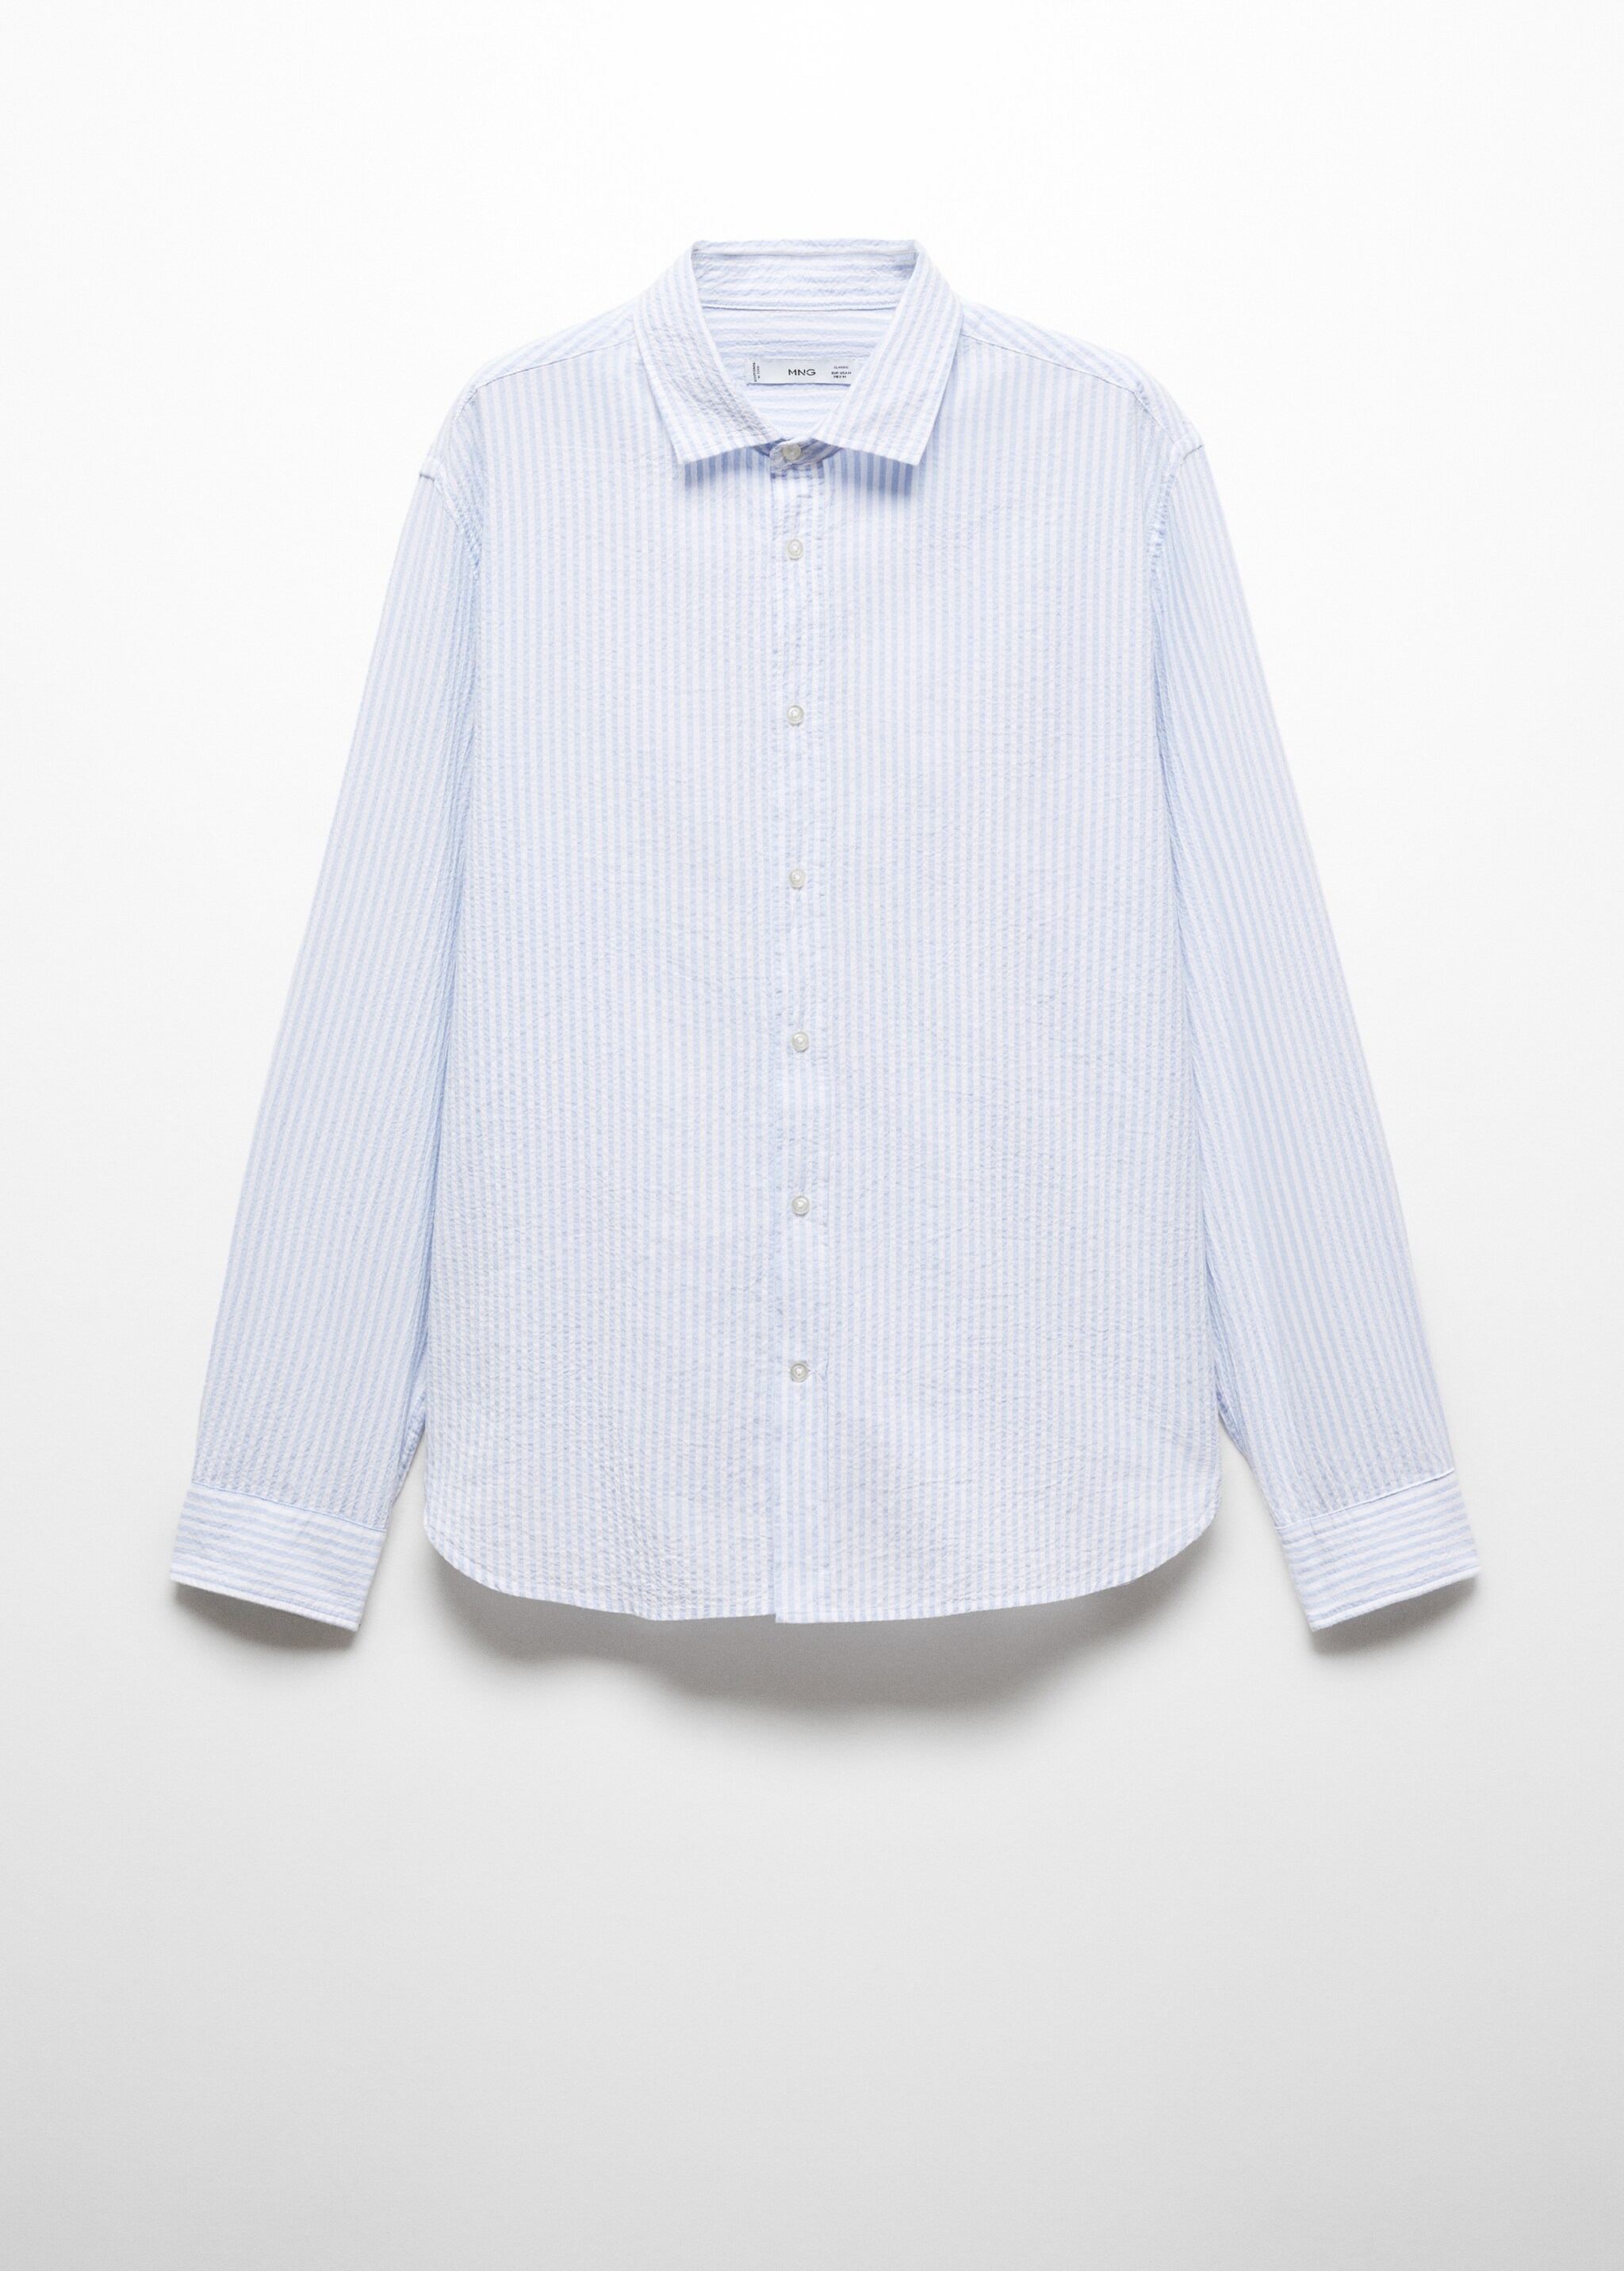 Classic fit seersucker cotton shirt - Article without model